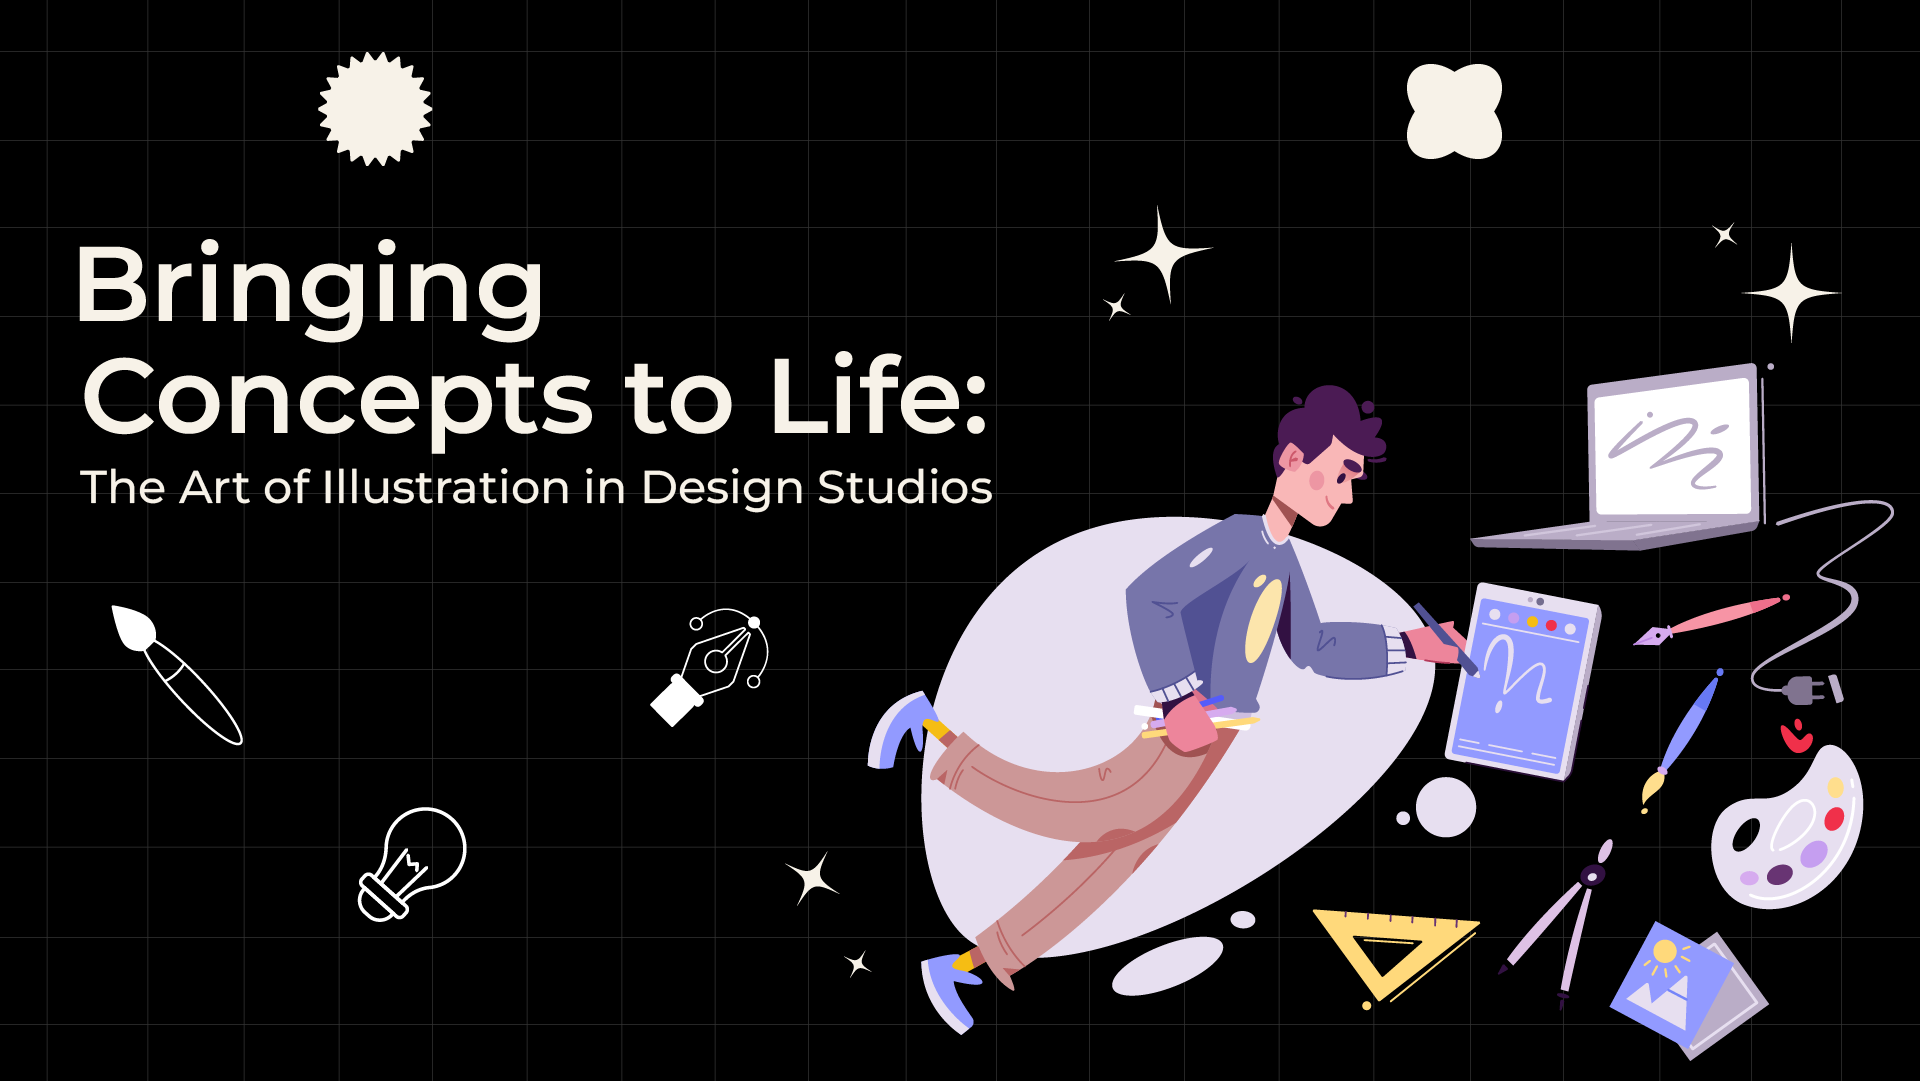 Bringing Concepts to Life: The Art of Illustration in Design Studios